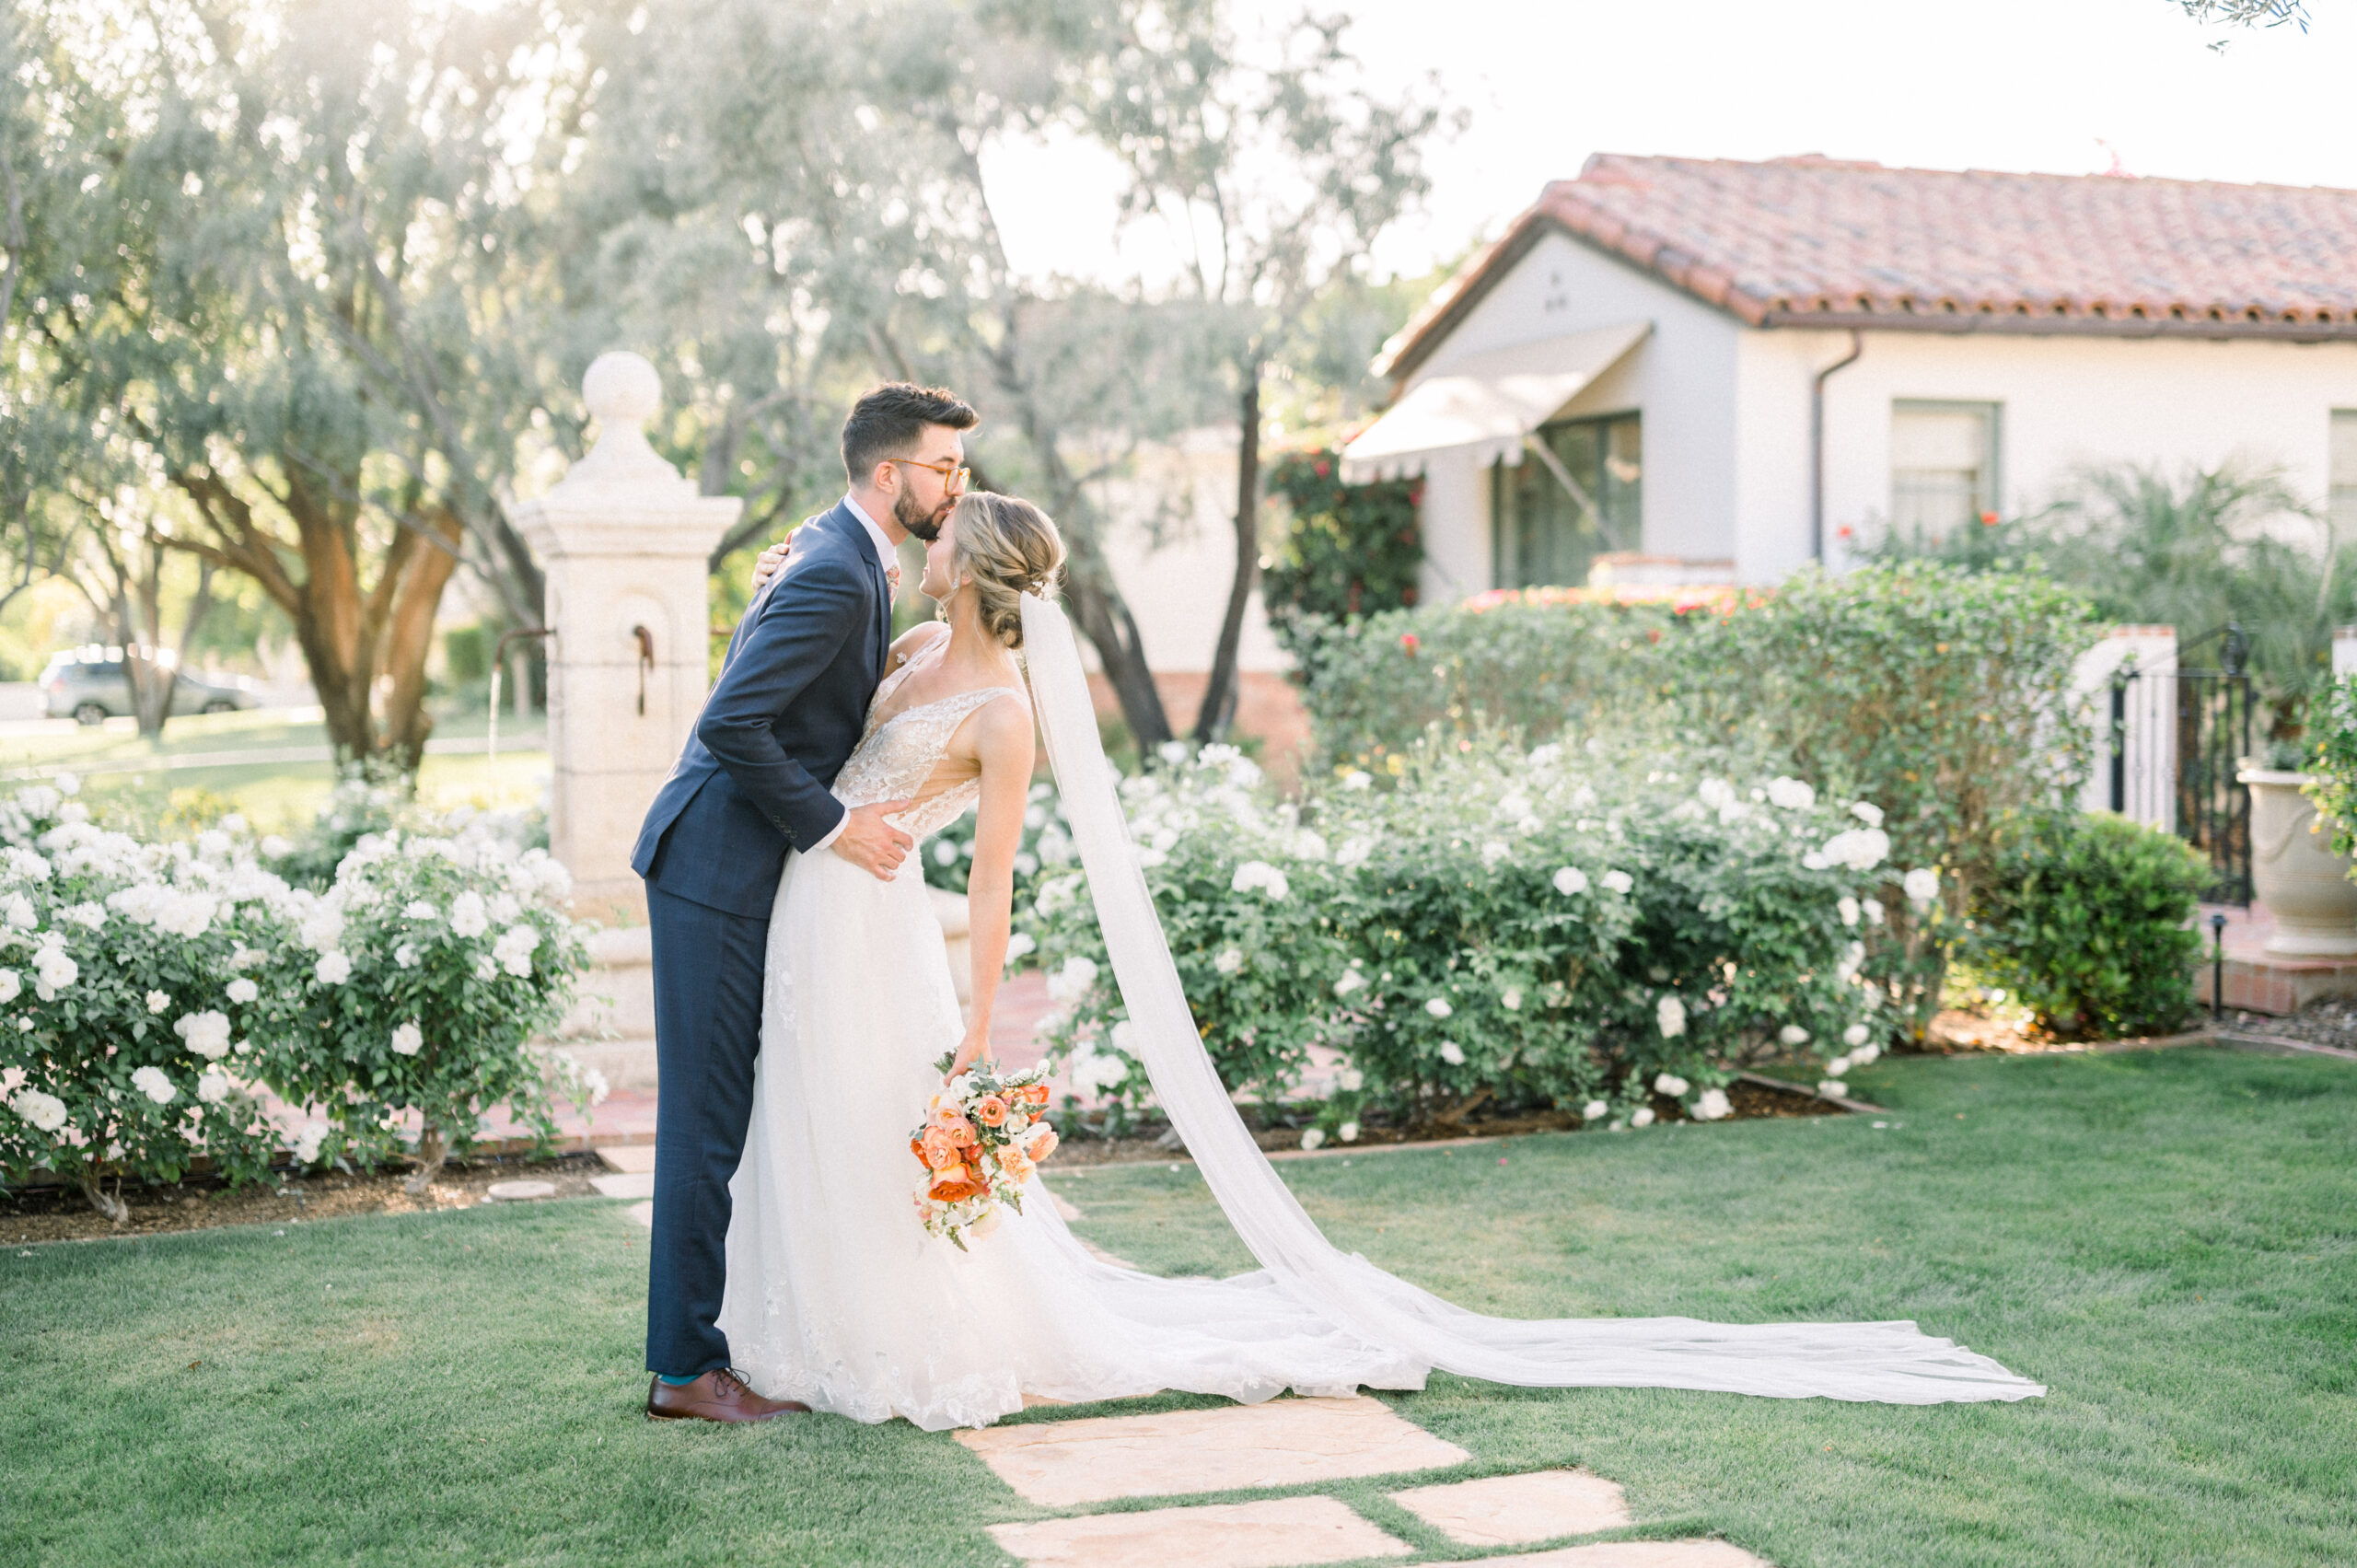 In the heart of Paradise Valley and Scottsdale in Arizona, this private estate wedding was filled with beautiful spring colors.